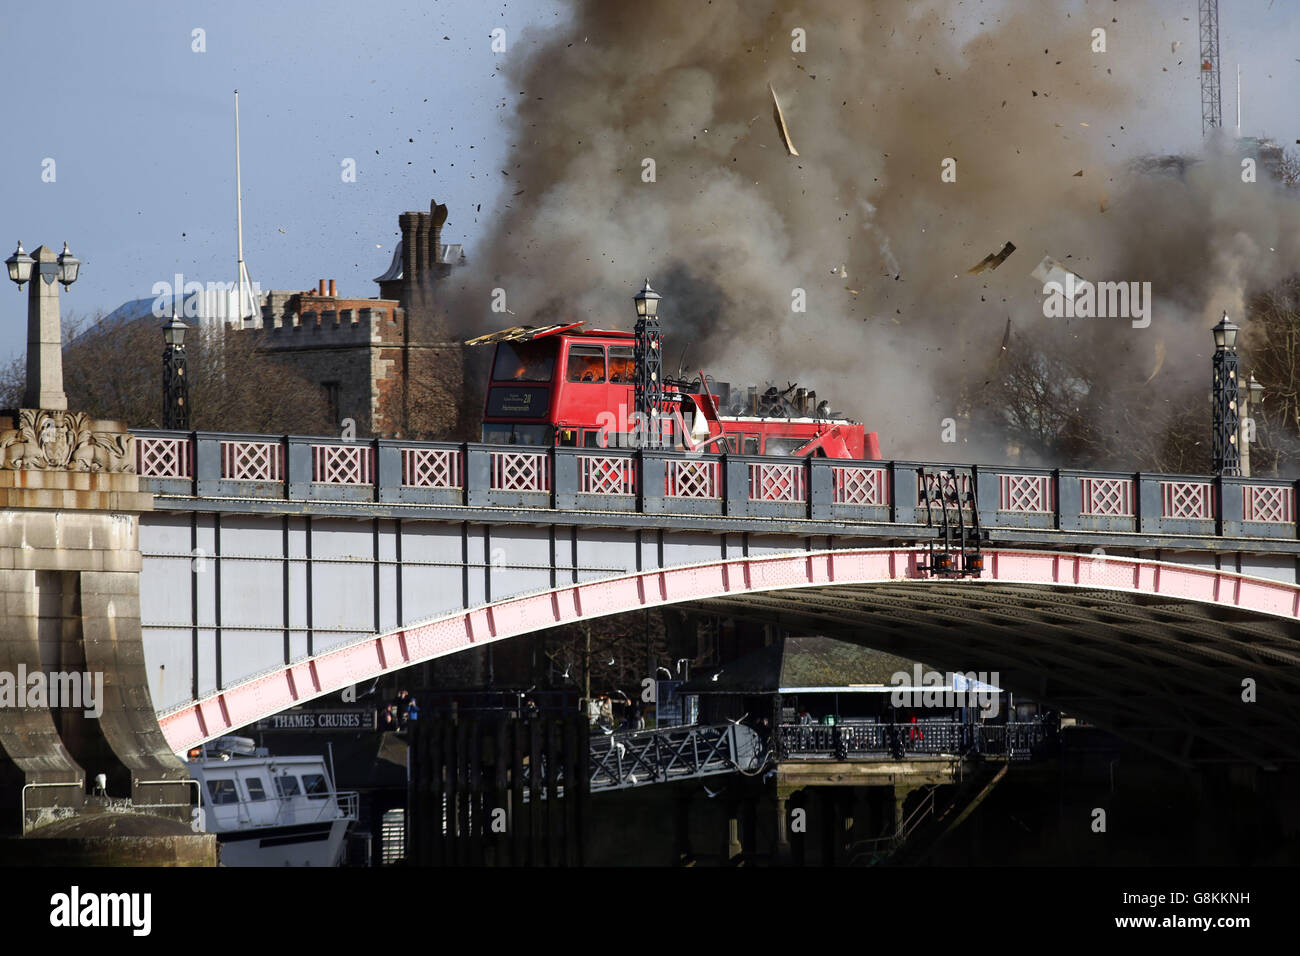 A bus explodes on Lambeth Bridge in London during filming for Jackie Chan's new film The Foreigner. Stock Photo